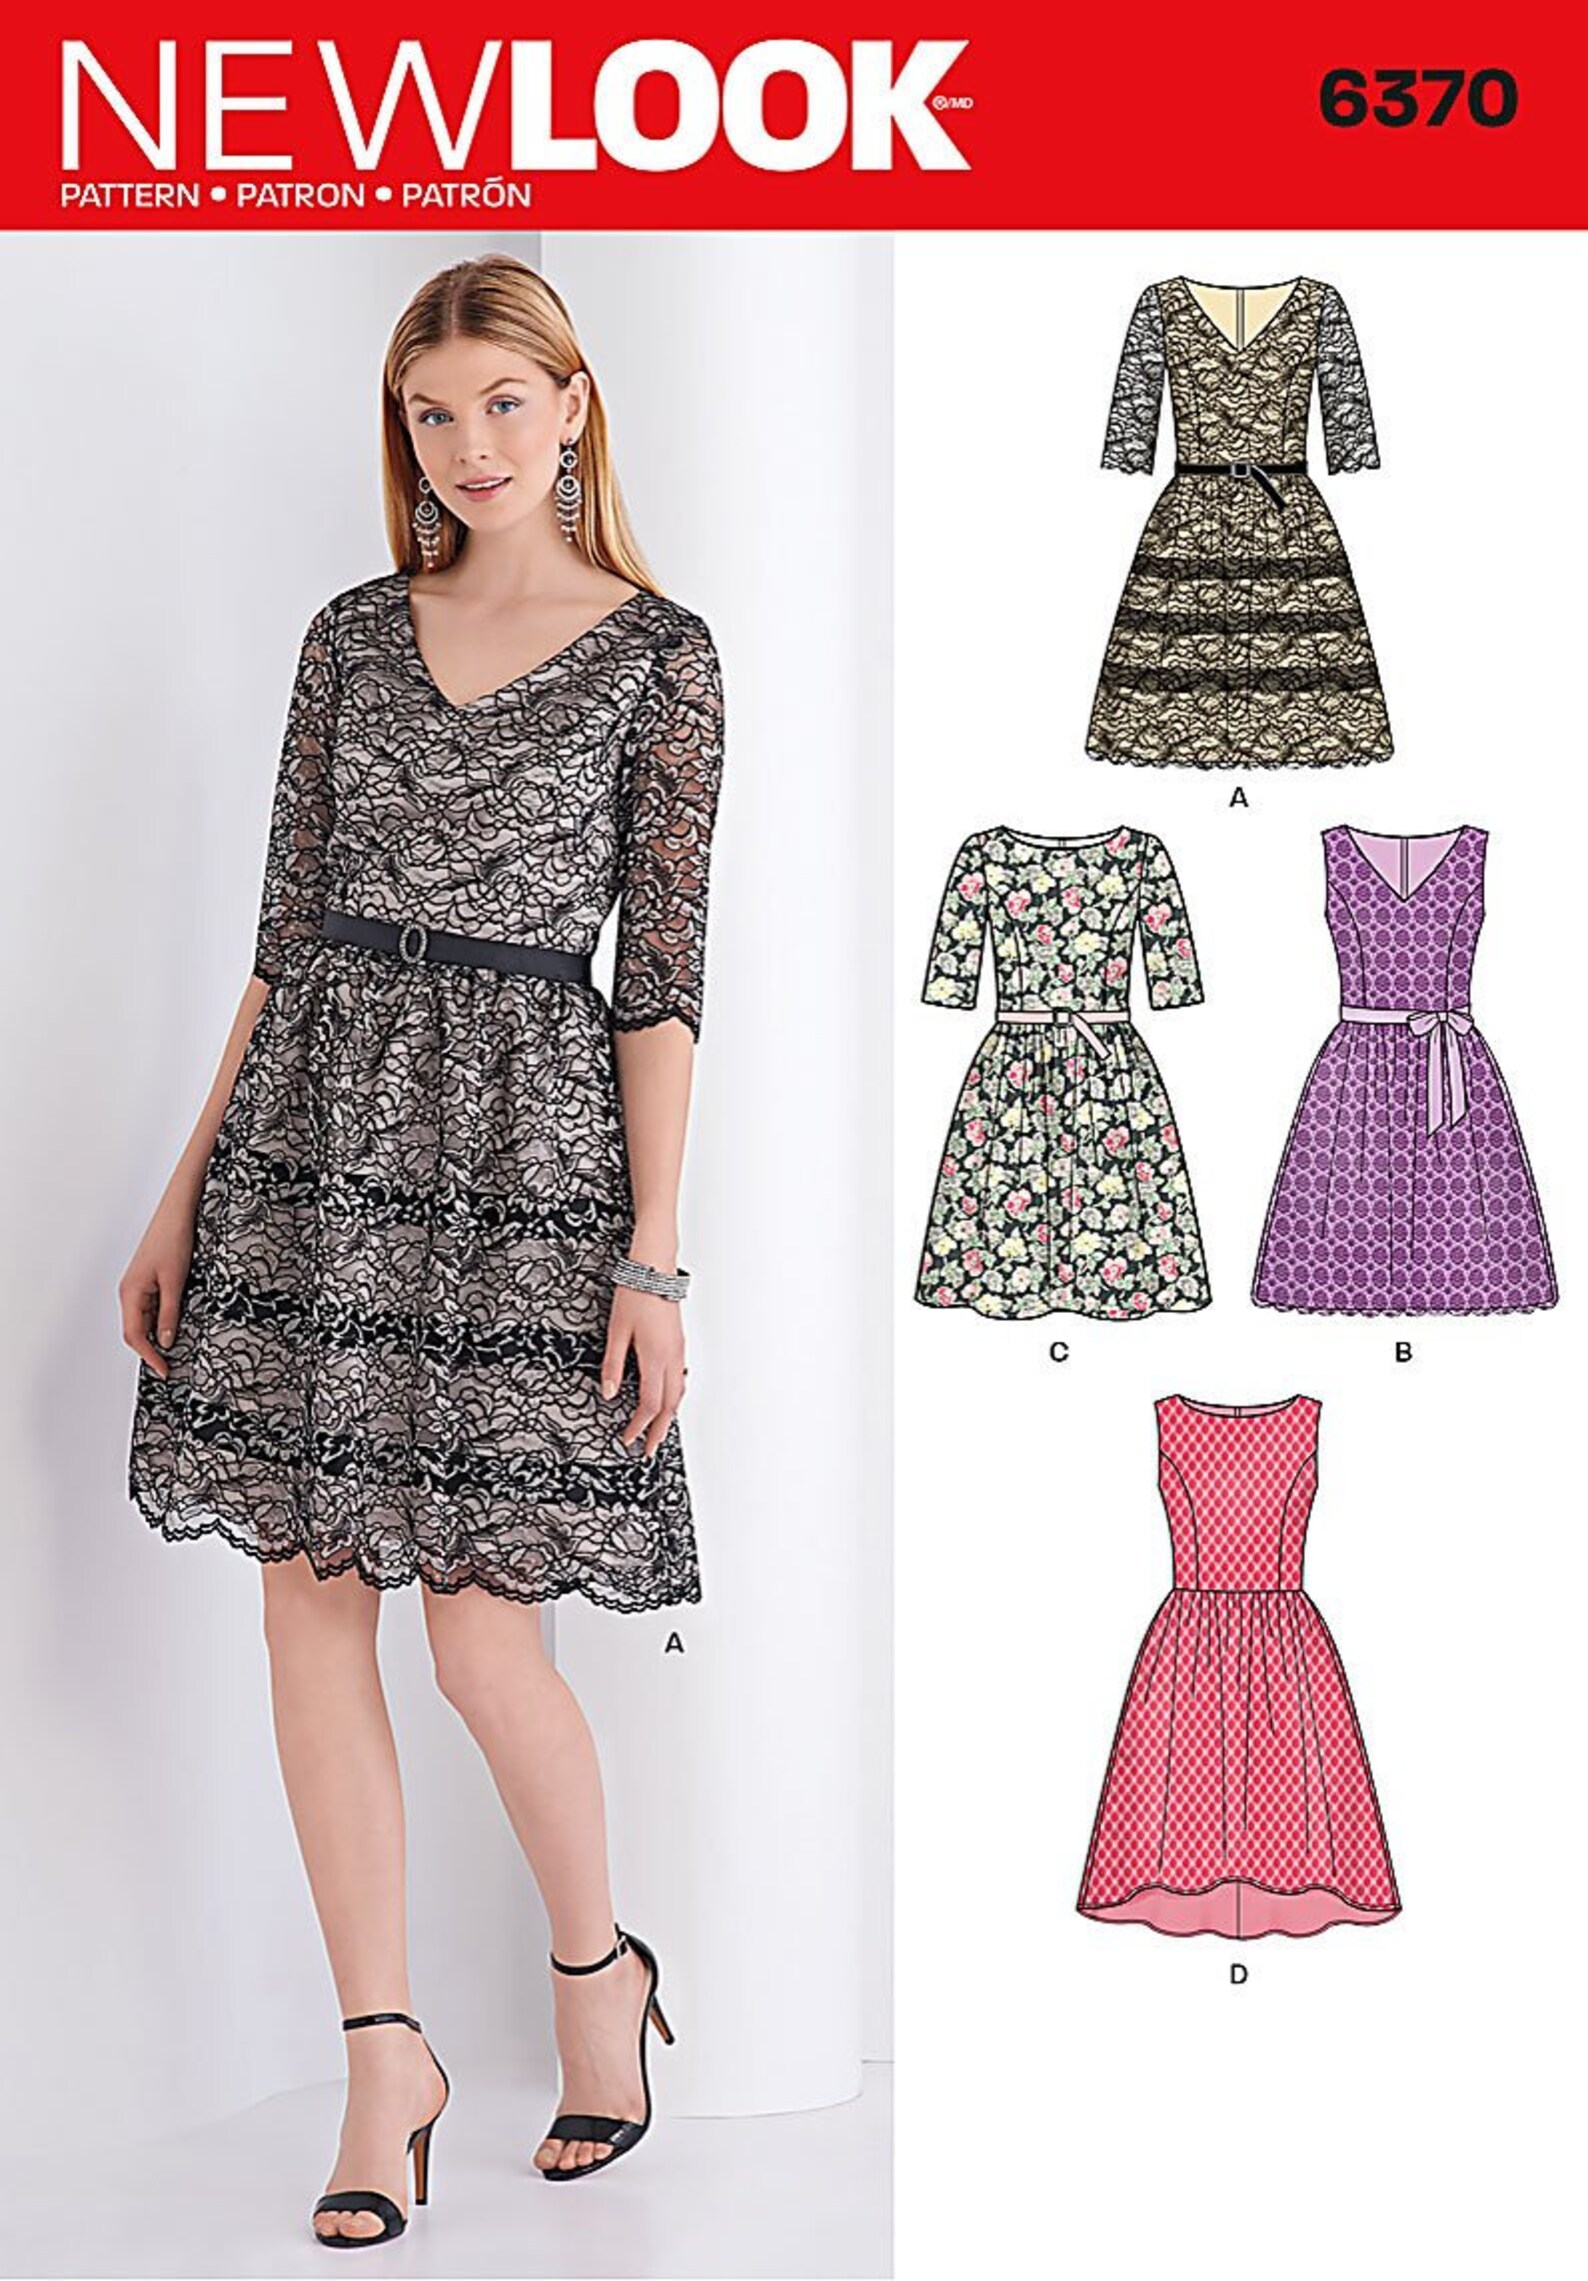 New Look 6370 Misses' Dress With Bodice Variations - Etsy